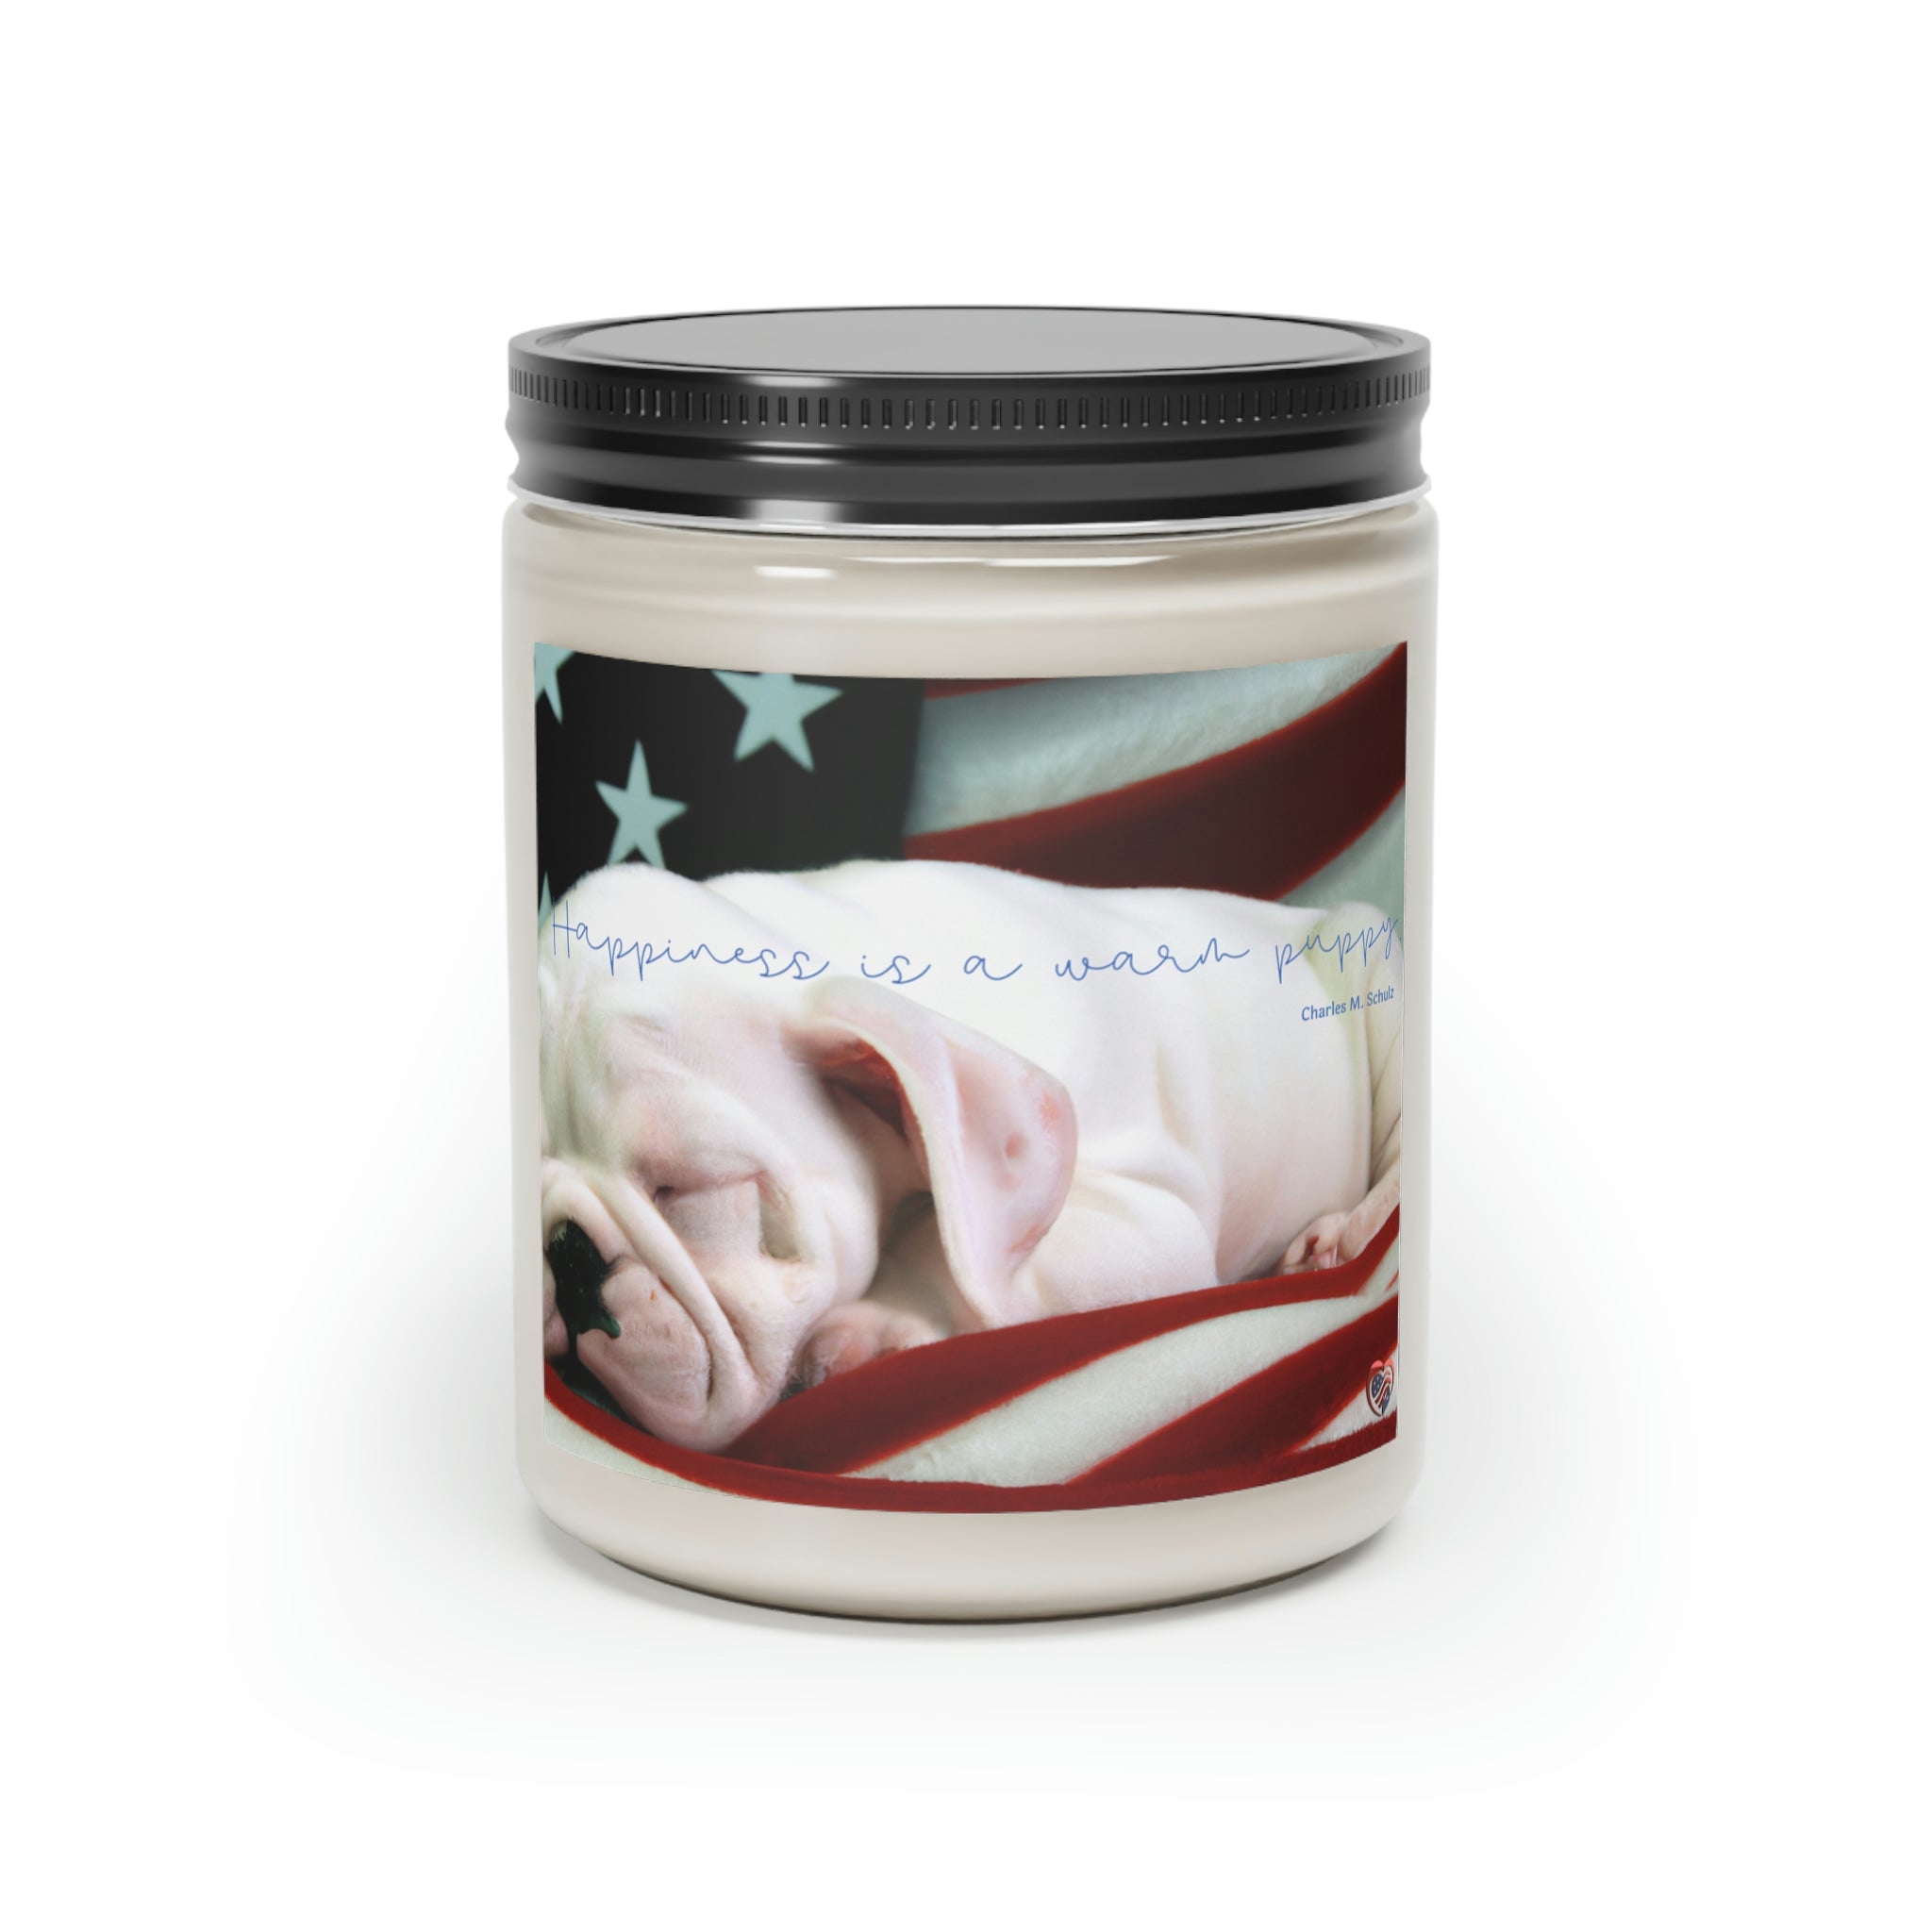 "Happiness is a Warm Puppy" - Scented Soy Candle - 50 hour